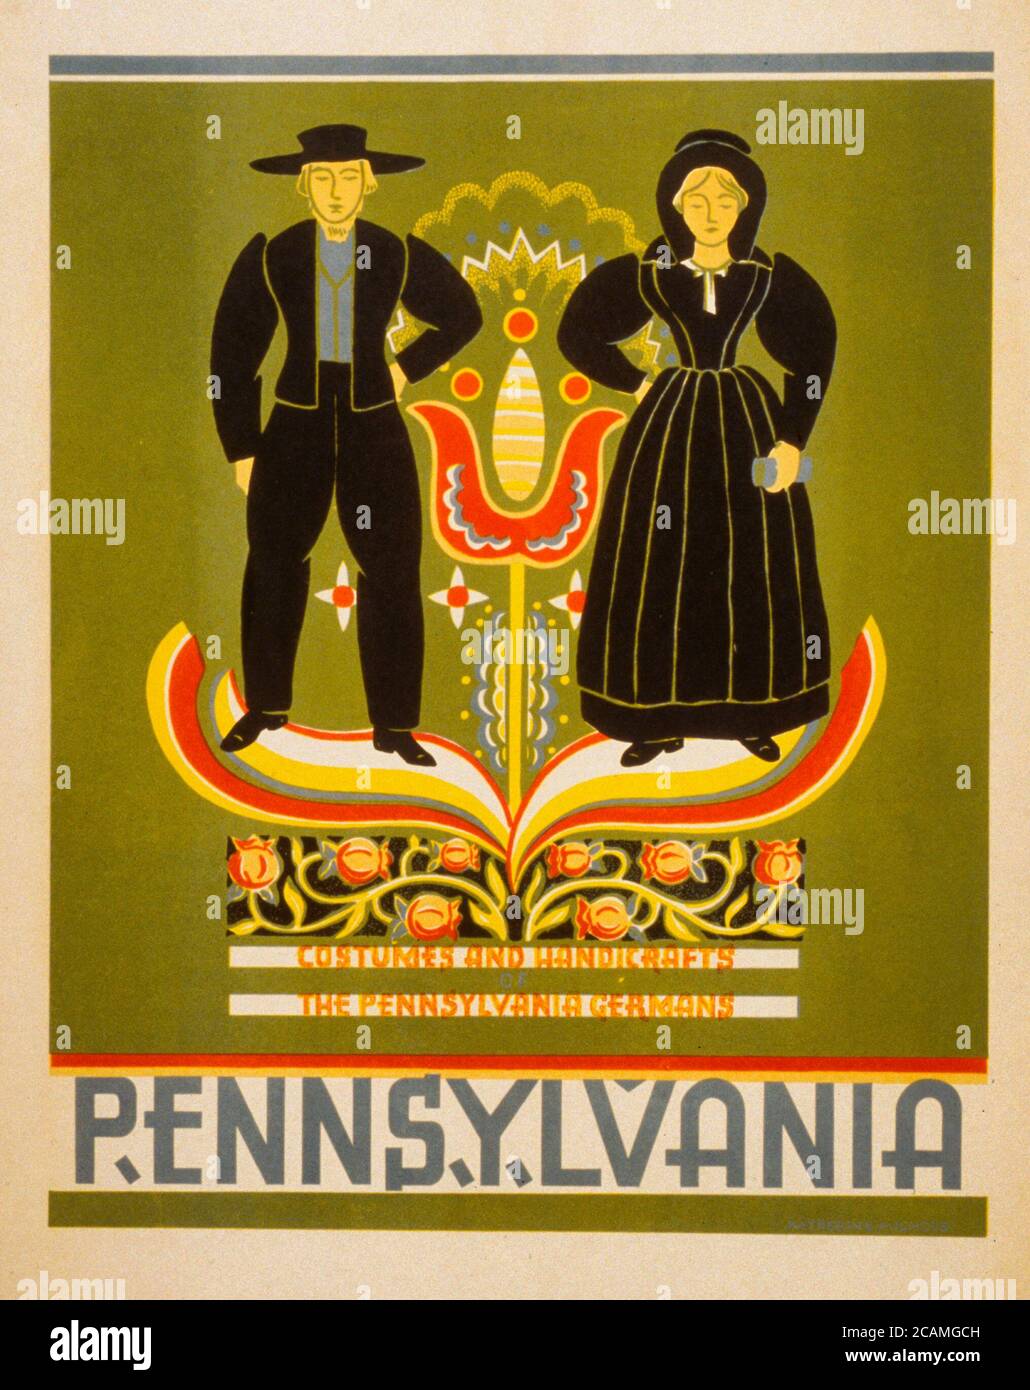 Pennsylvania Costumes and handicrafts, the Pennsylvania Germans. Poster promoting Pennsylvania, showing an Amish couple, circa 1939 Stock Photo